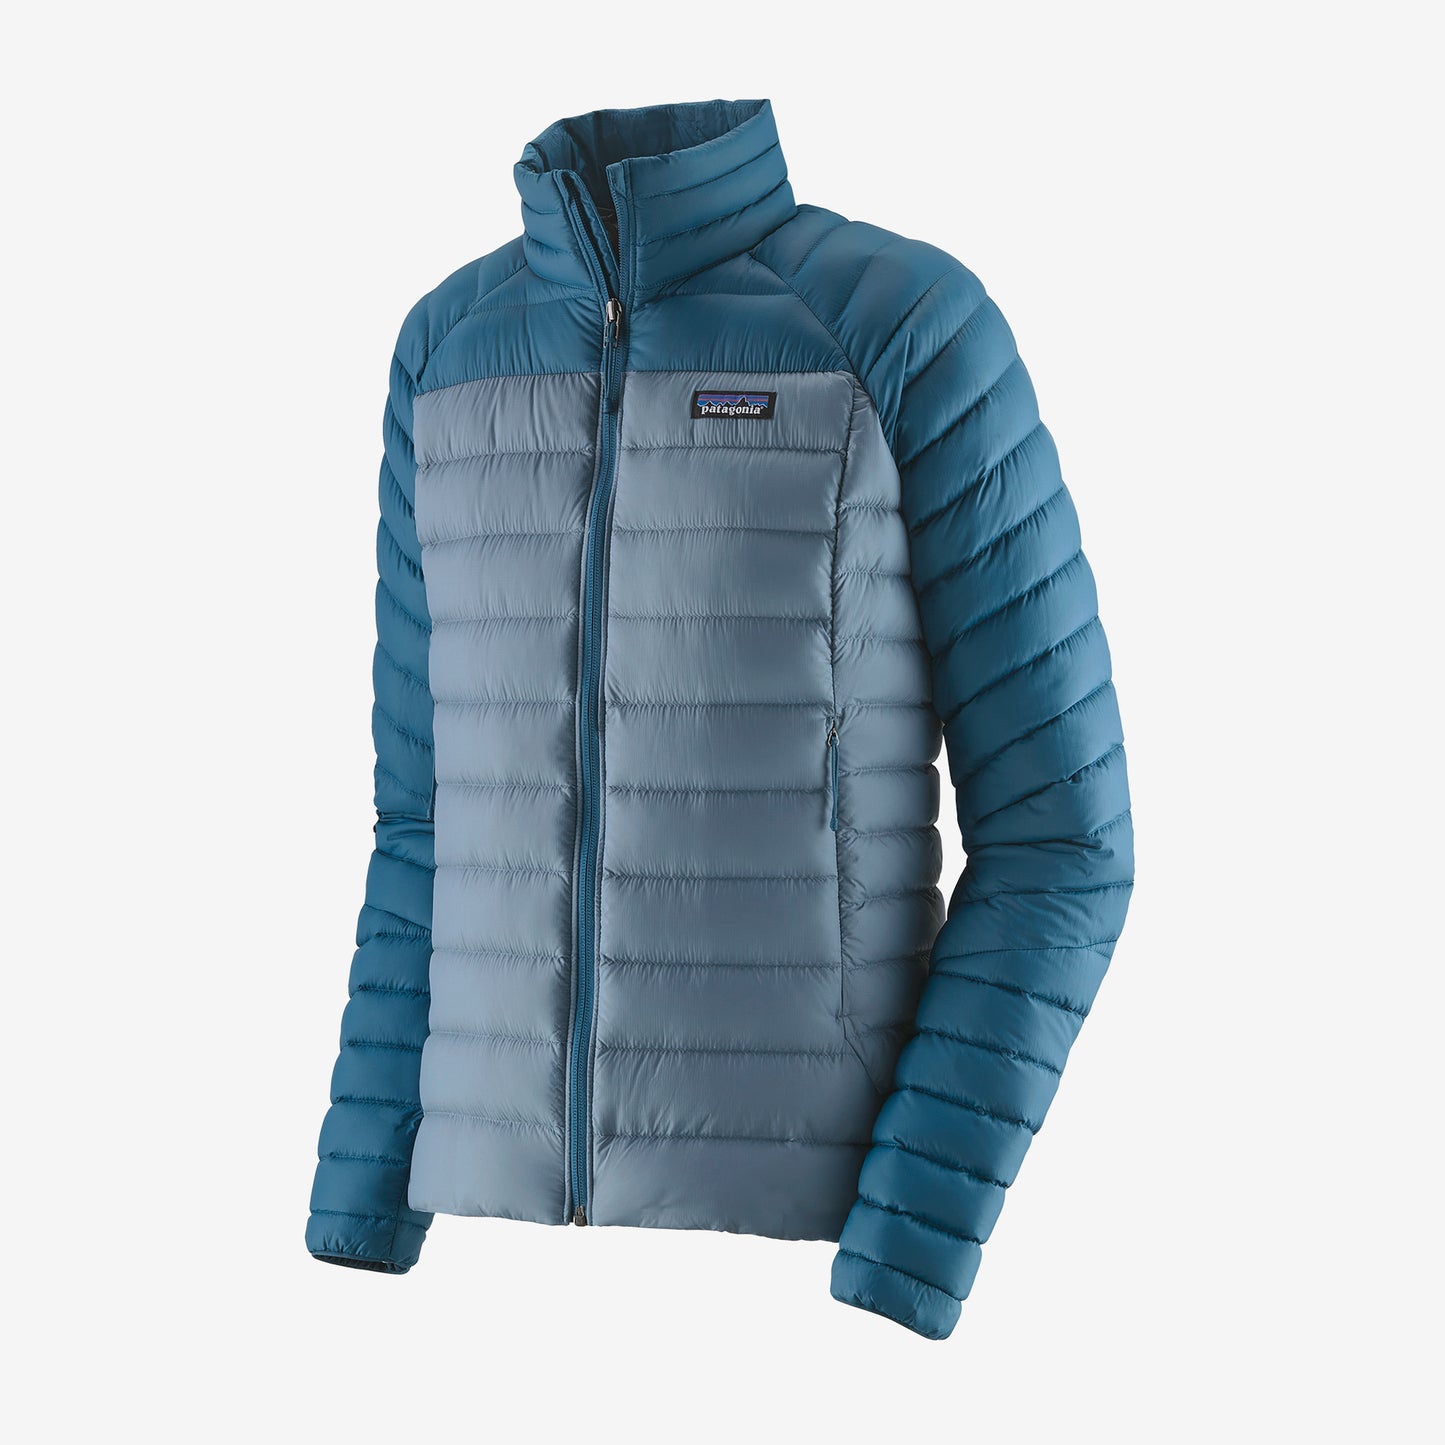 Patagonia Women's Down Sweater Jacket (NEW)